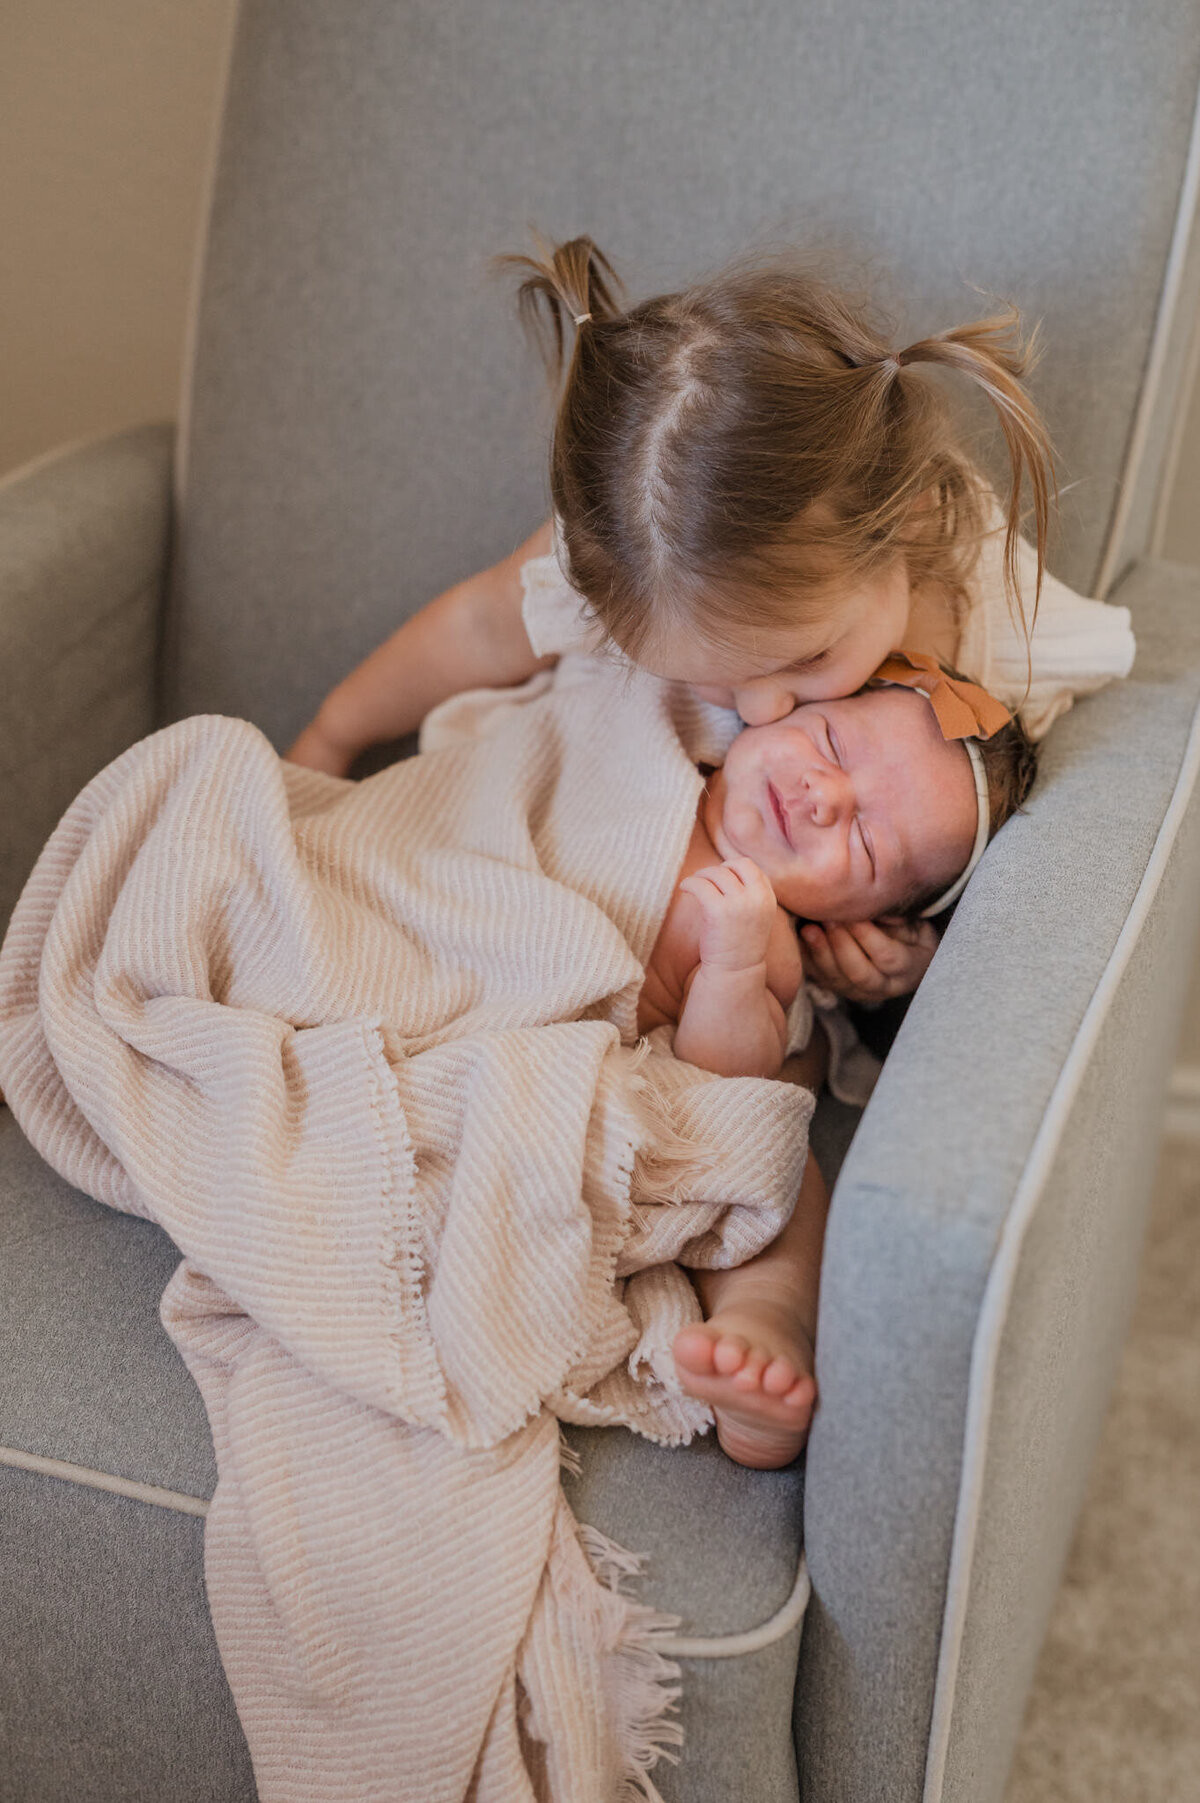 Toddler kisses her baby sister on the cheek while they sit together in the nursery rocker, taken by San Antonio newborn photographer Cassey Golden.